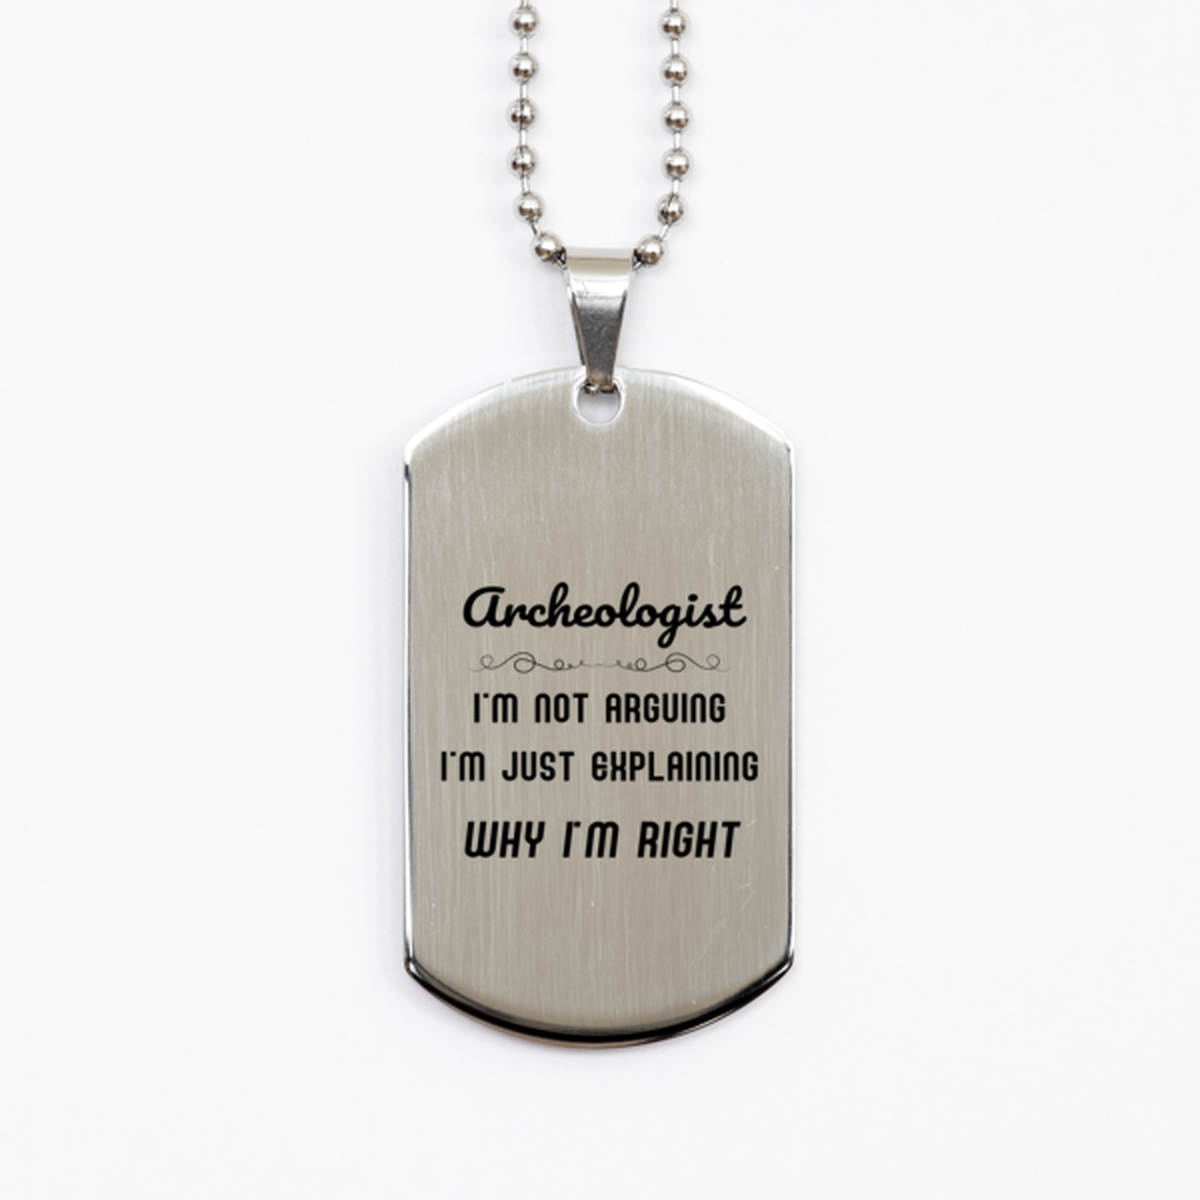 Archeologist I'm not Arguing. I'm Just Explaining Why I'm RIGHT Silver Dog Tag, Funny Saying Quote Archeologist Gifts For Archeologist Graduation Birthday Christmas Gifts for Men Women Coworker